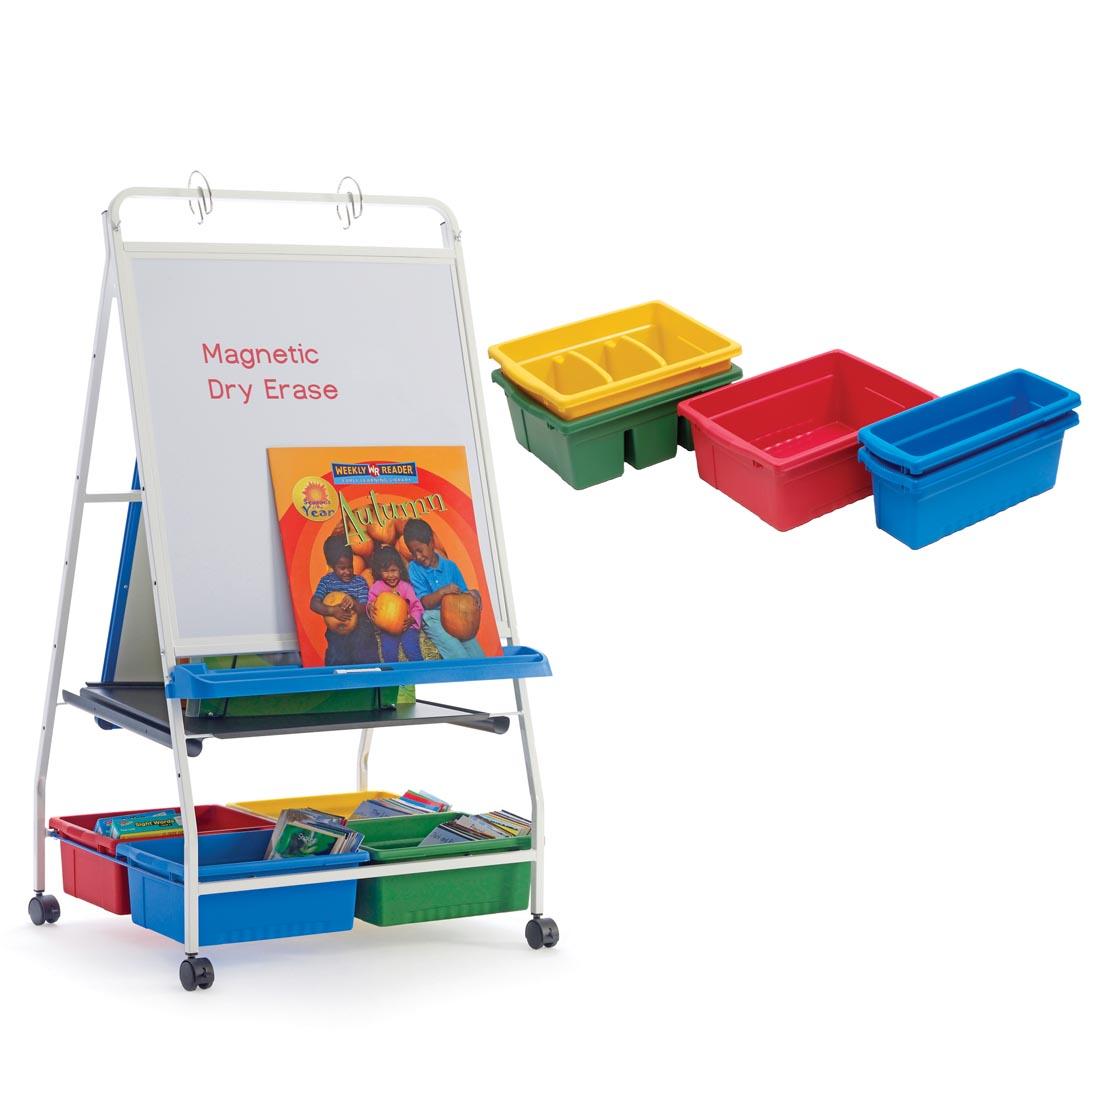 Classic Royal Reading & Writing Center With Premium Tubs; shown on the cart plus on the side